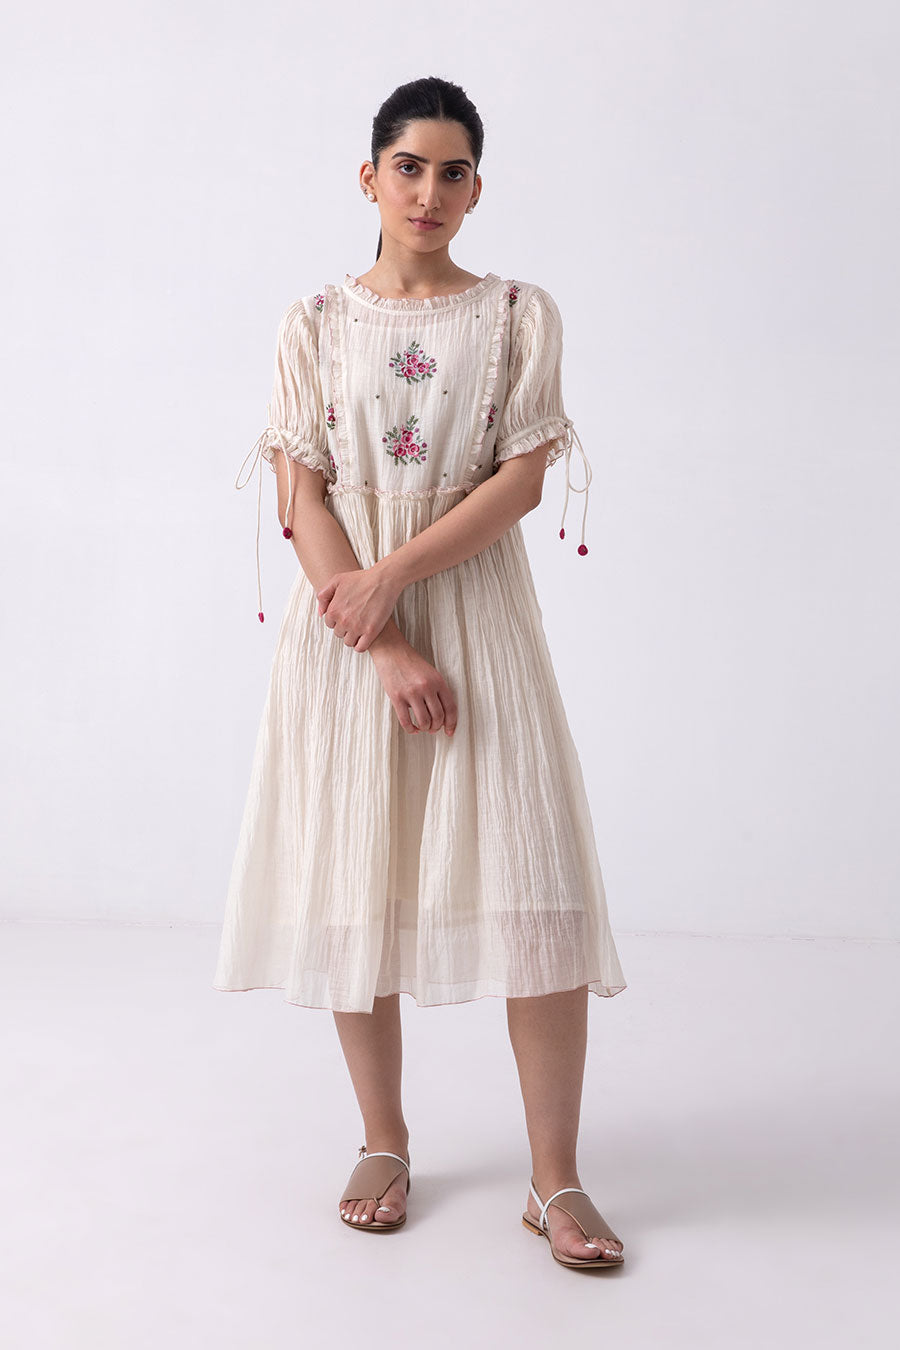 Off-White Floral Embroidered Dress